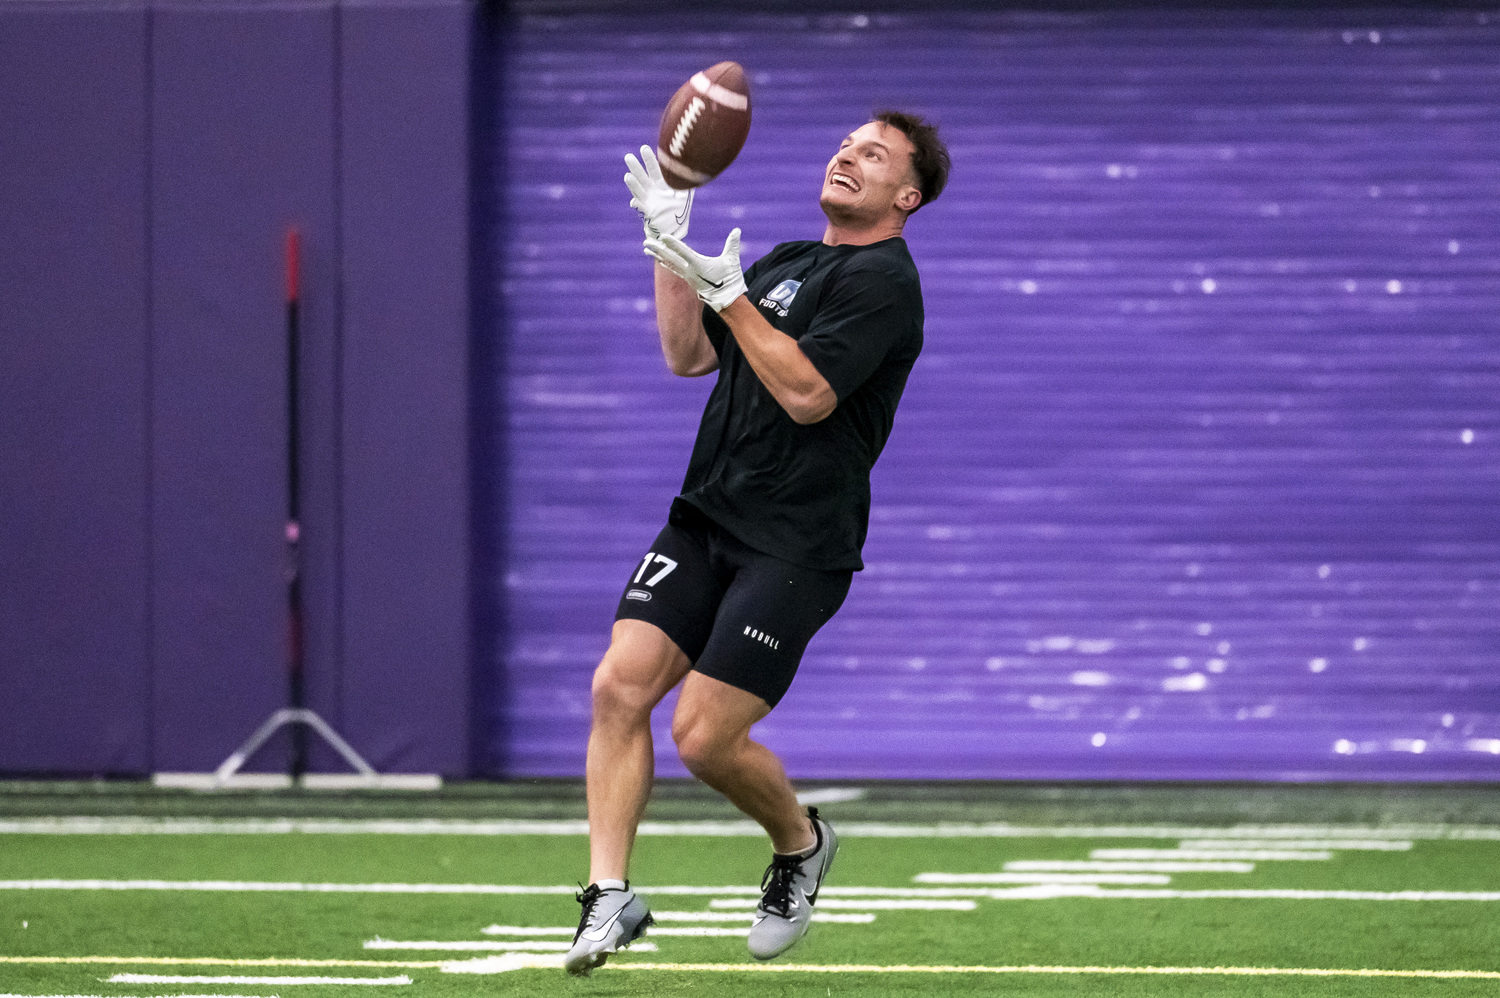 Westhampton Beach and soon-to-be University of New Hampshire graduate Dylan Laube performs drills during College of the Holy Cross's annual NFL Pro Day March 21. UNH Athletics/Patrick Donnelly